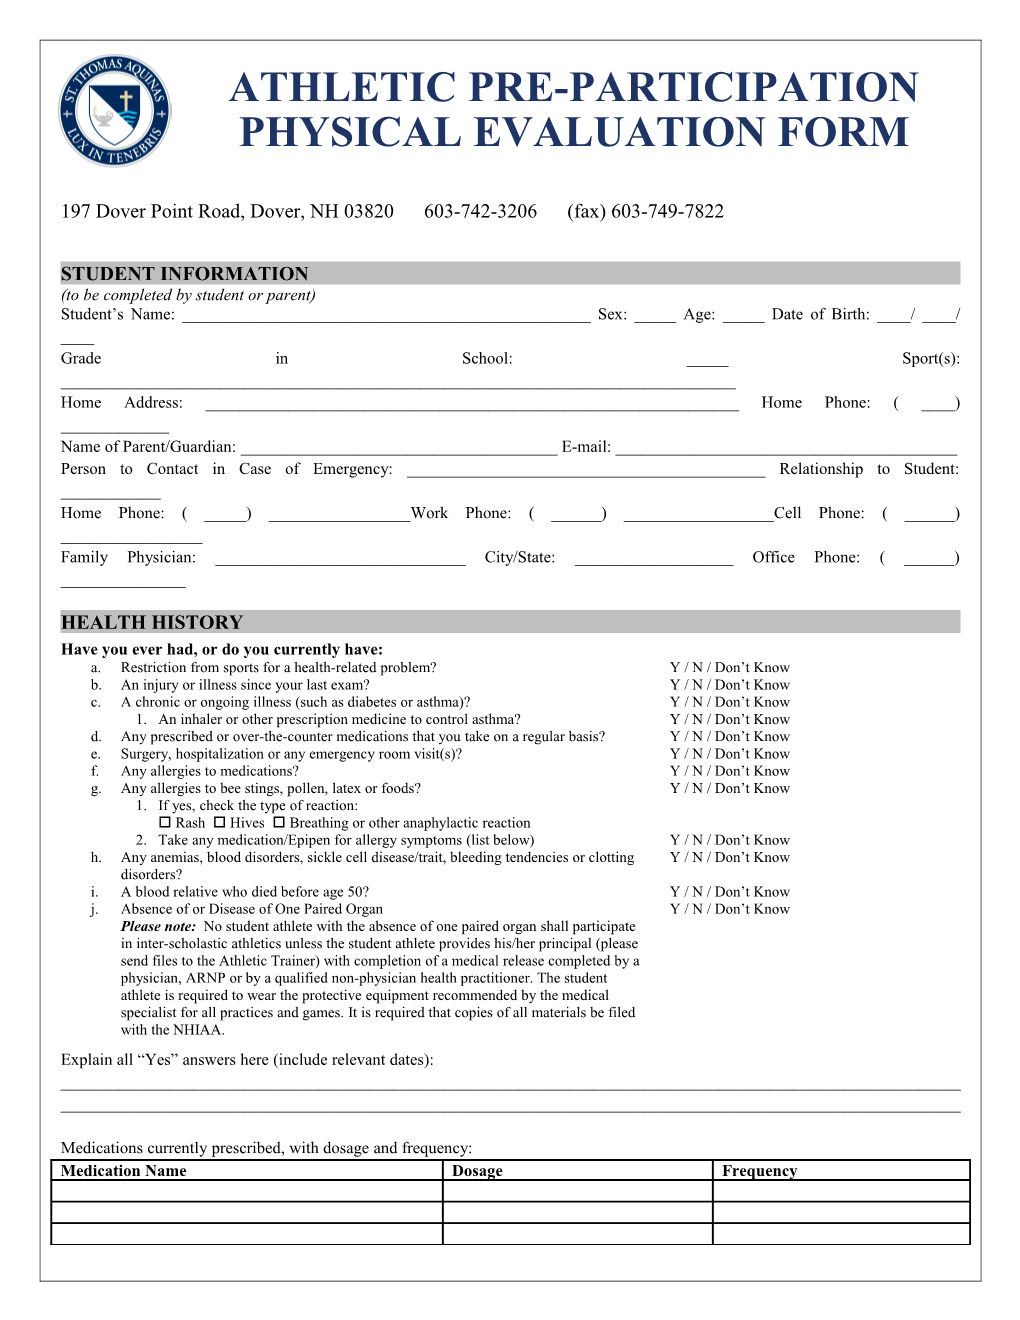 Athletic Pre-Participation Physical Evaluation Form